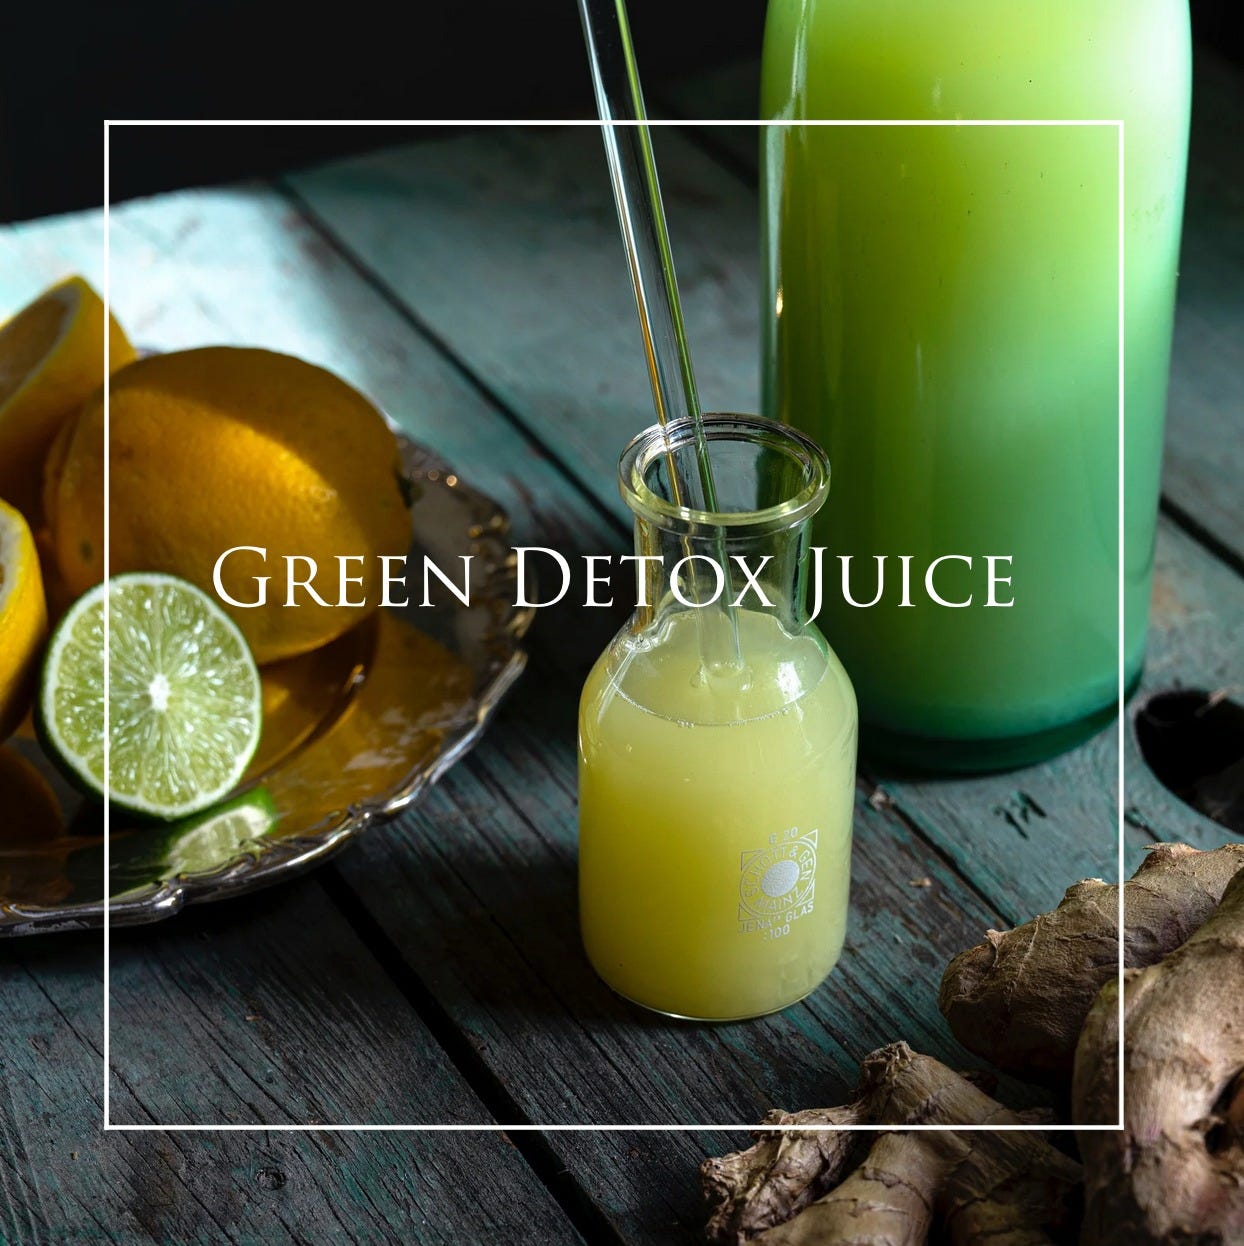 May be an image of algae, drink and text that says 'GREEN DETOX JUICE'